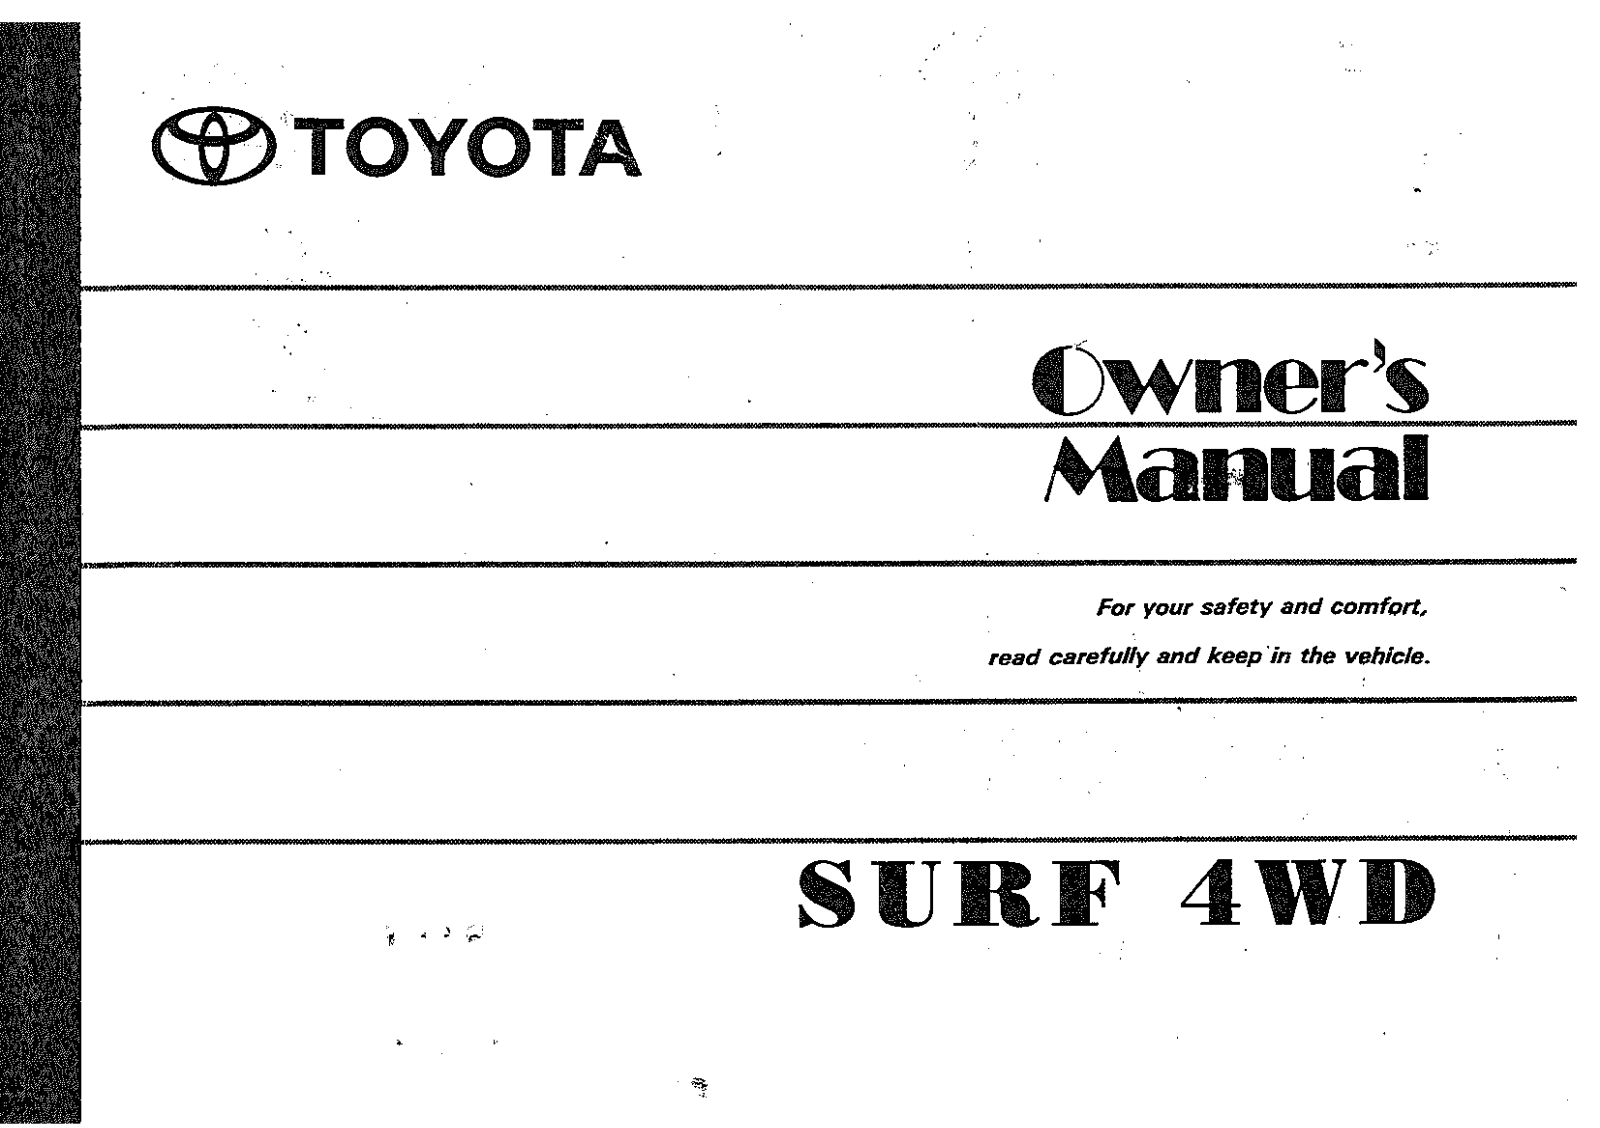 Toyota SURF 4WD owners Manual